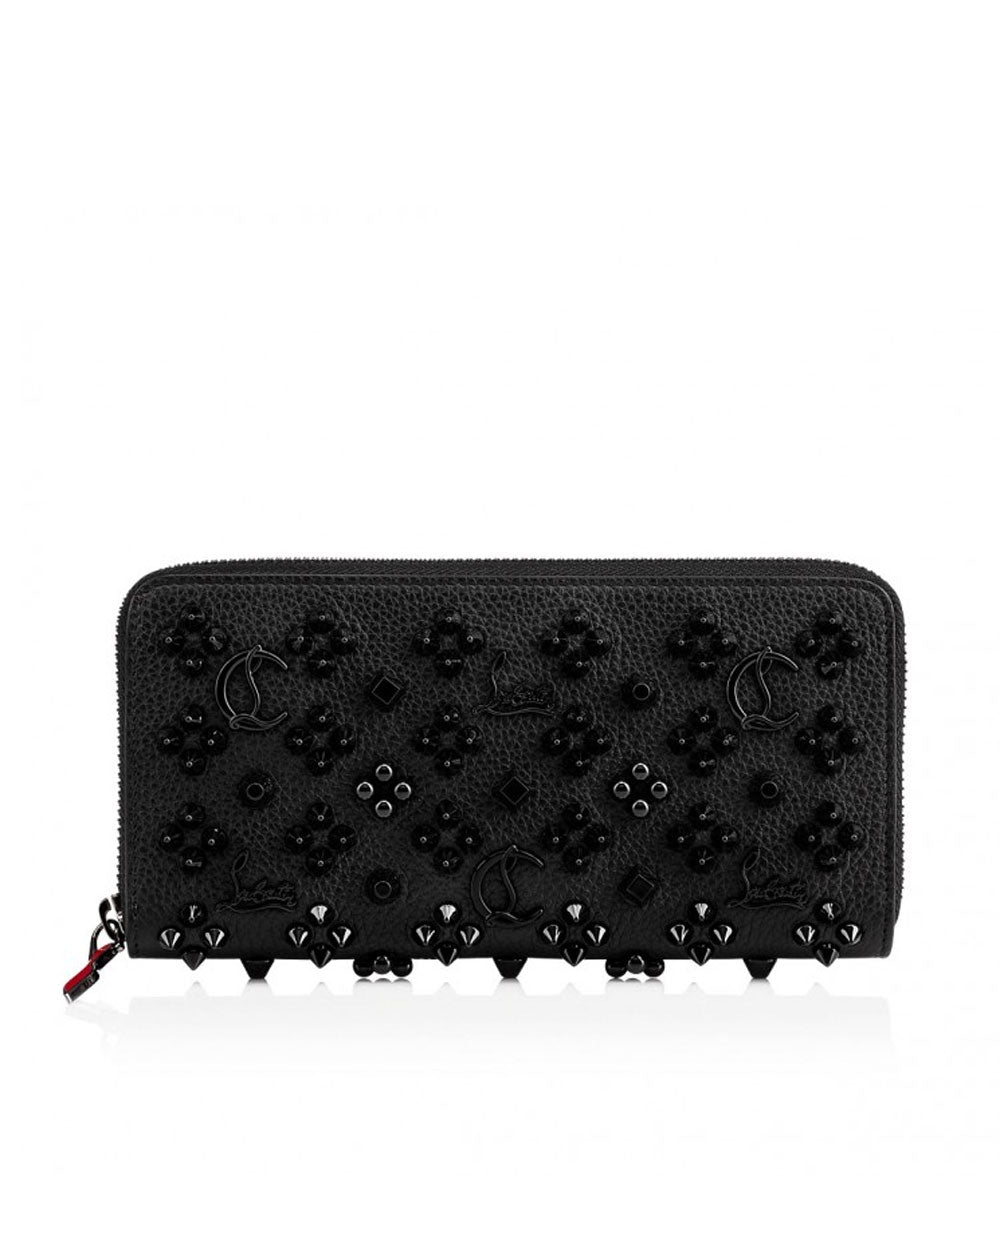 Panettone Wallet in Black